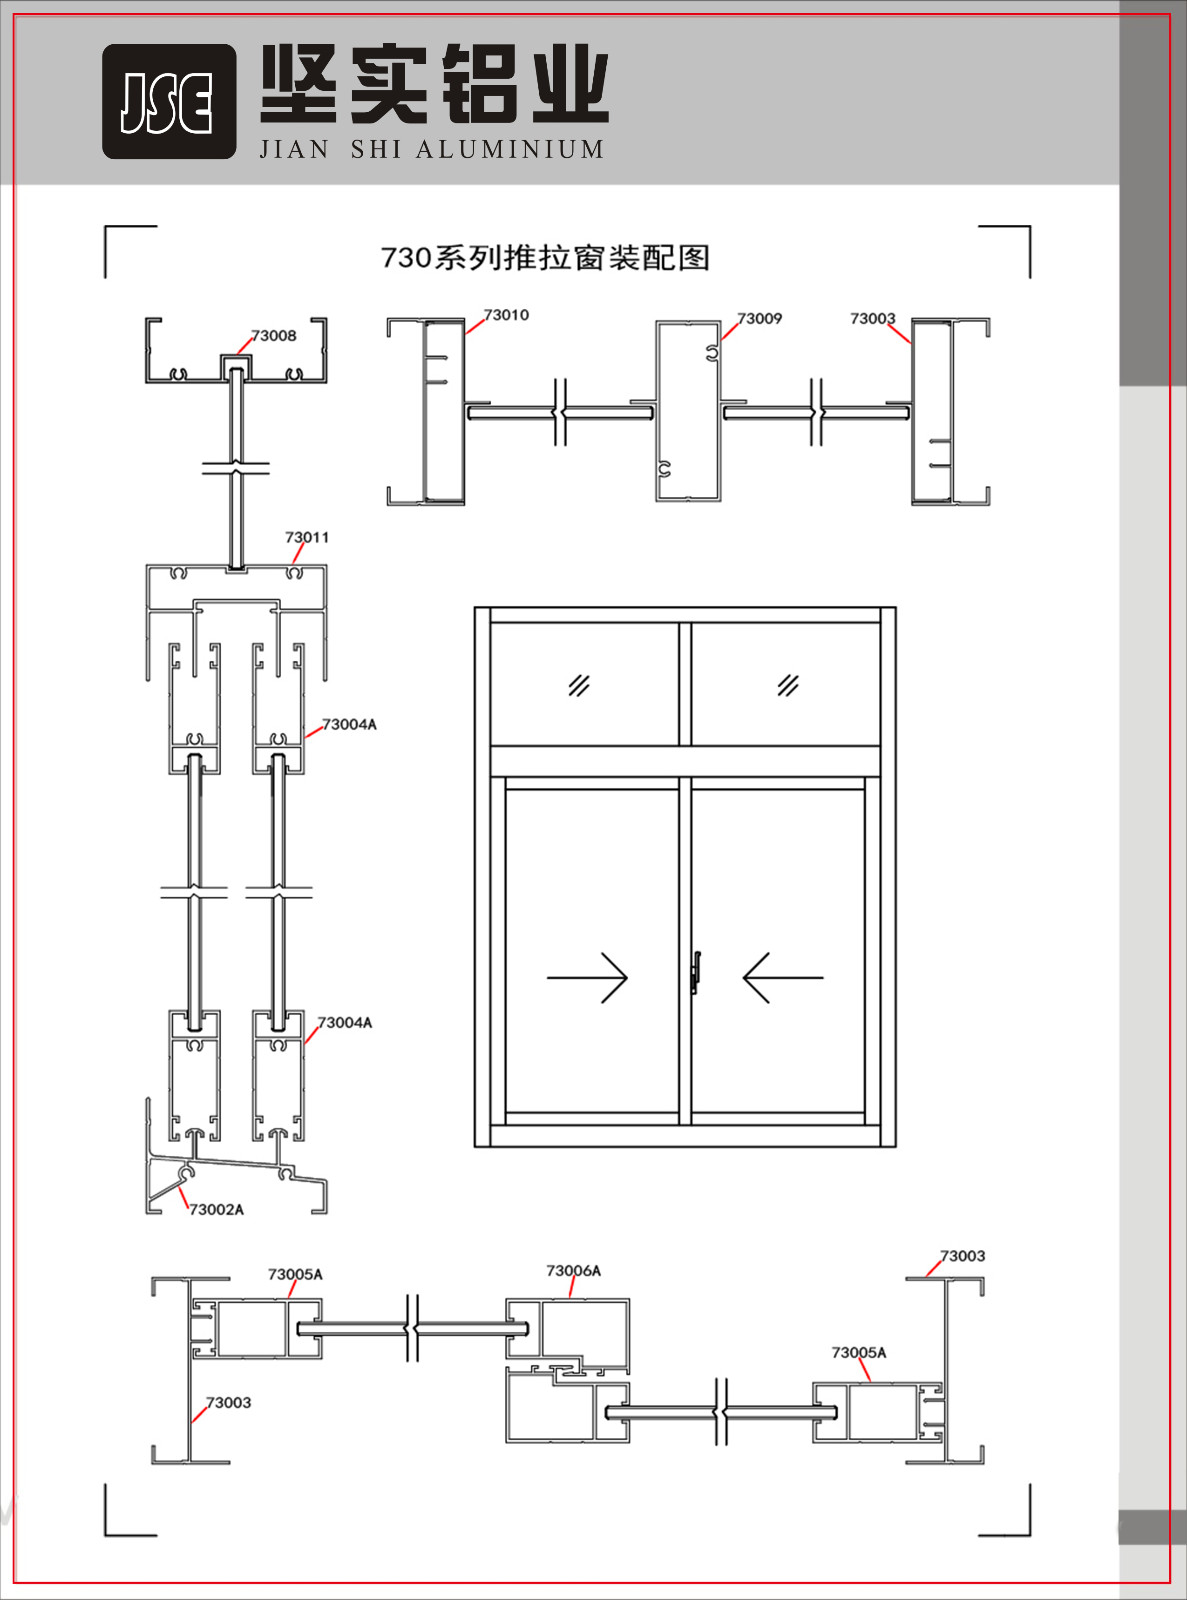 730 series sliding window assembly drawings